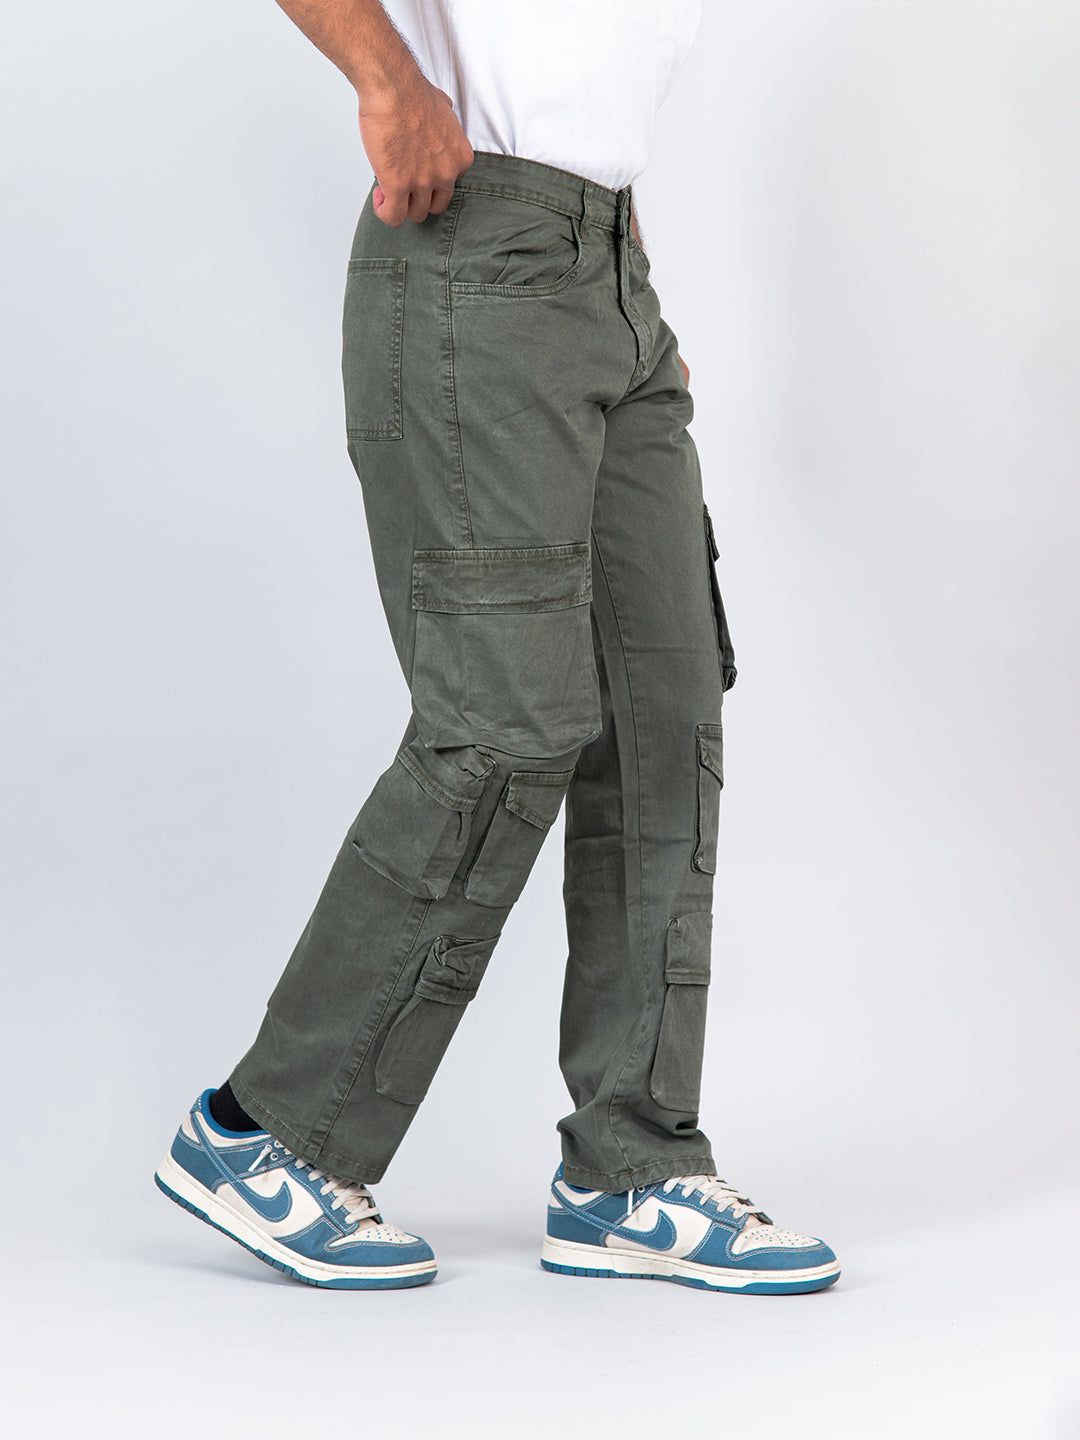 Dark Green Cargo Pants with Olive Sneakers Casual Warm Weather Outfits In  Their 20s (3 ideas & outfits) | Lookastic